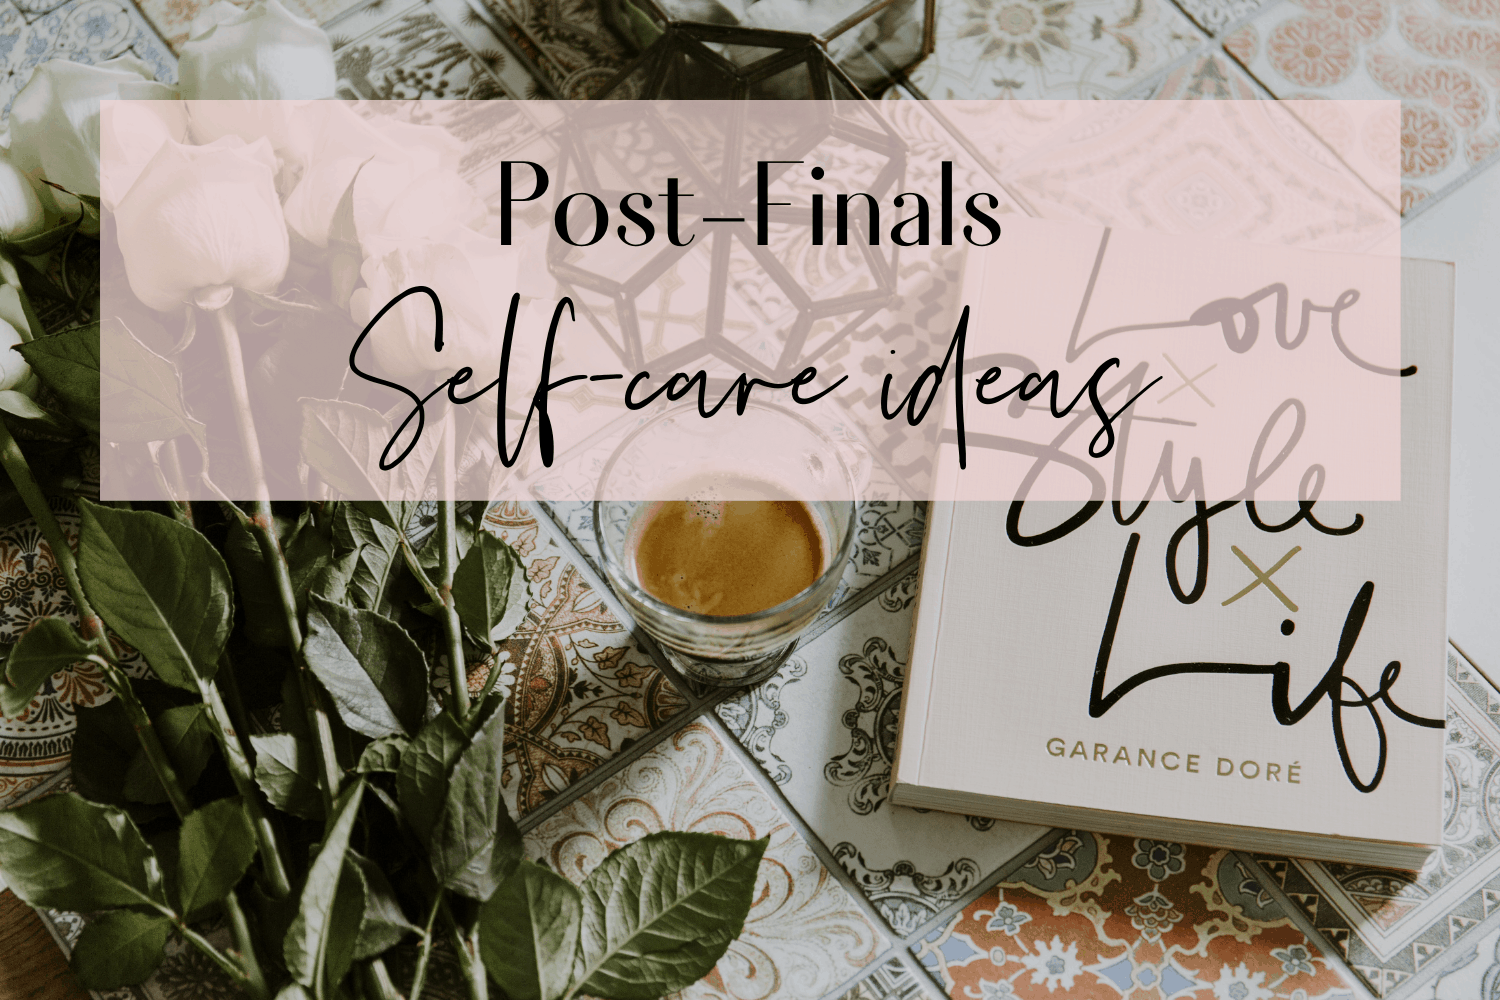 Post-Finals Self-Care! 5 Ways to Relax